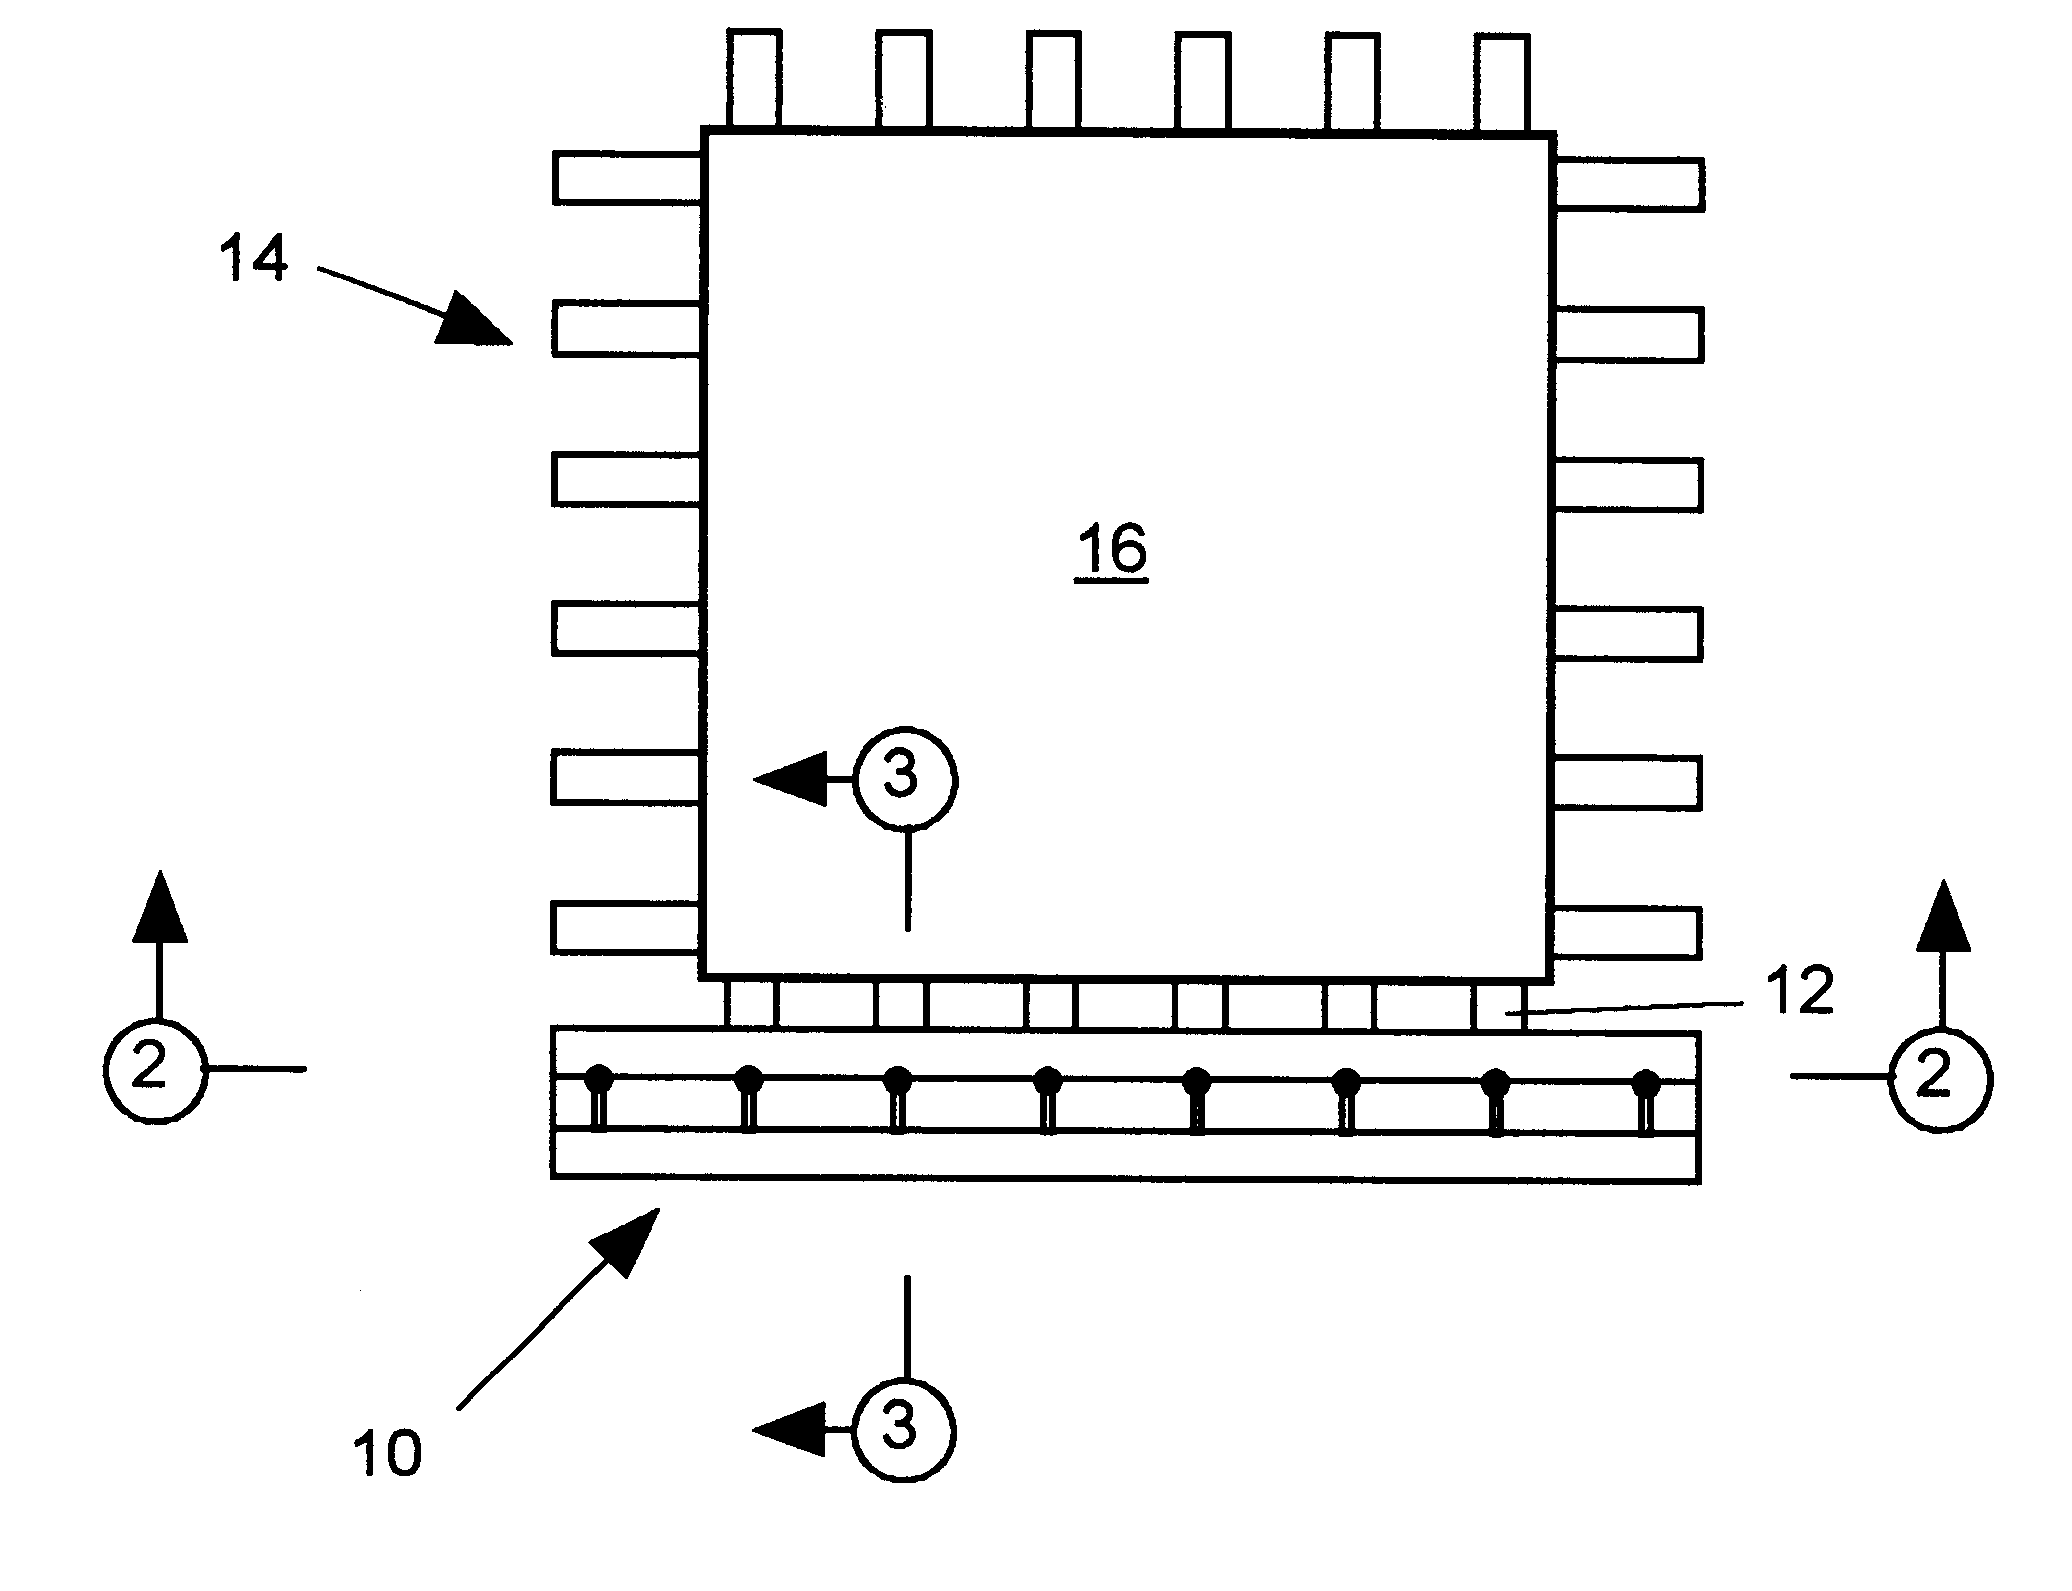 Self-soldering integrated circuit probe assembly